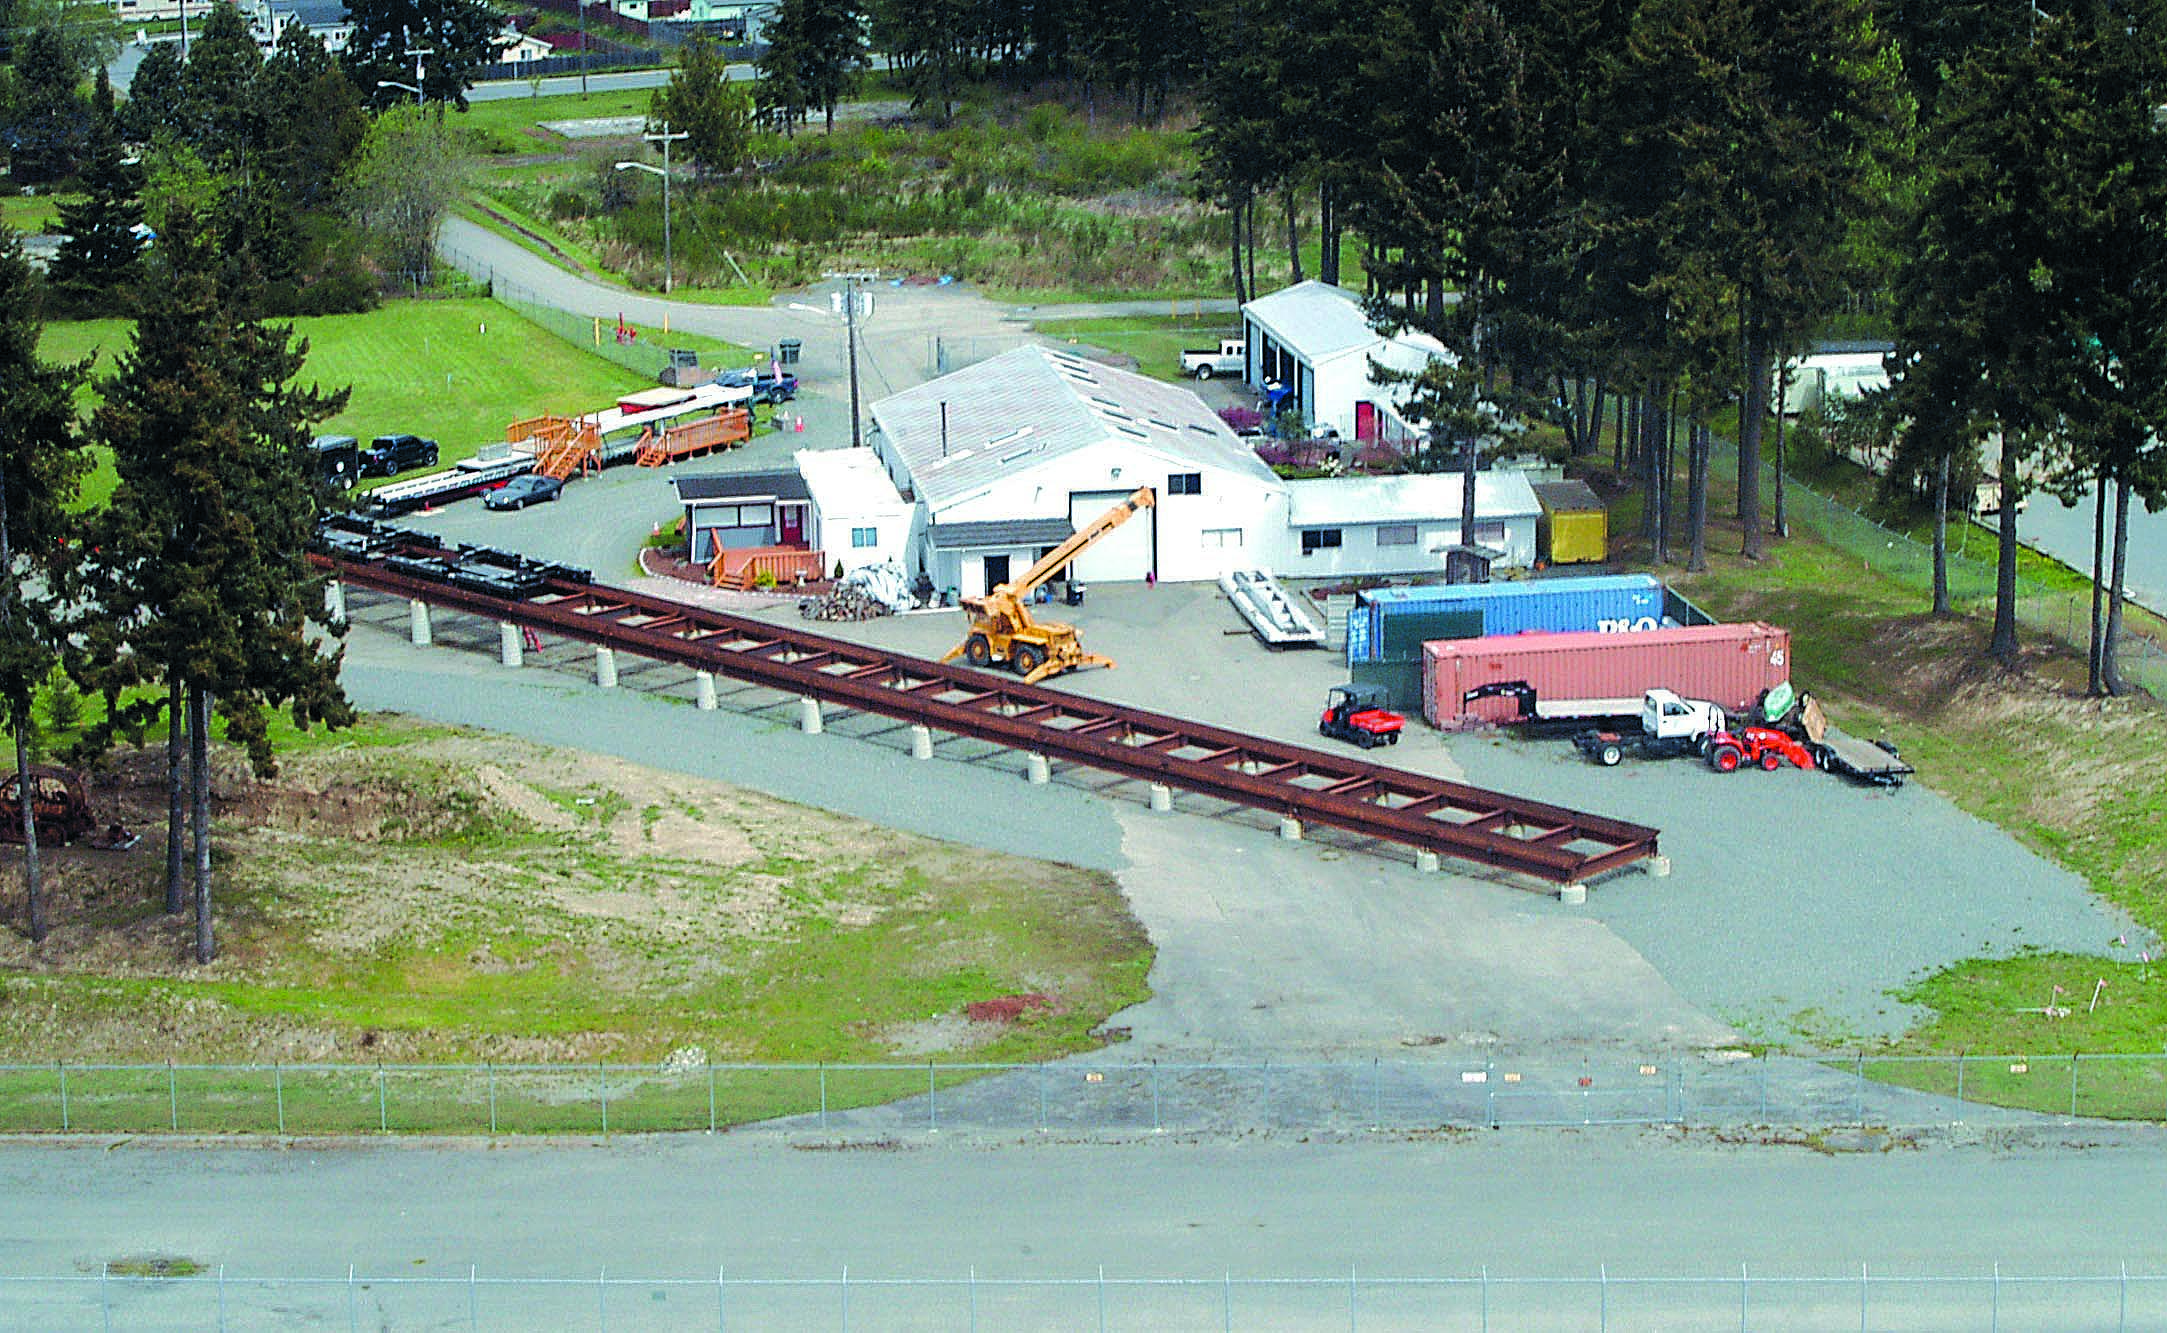 The LEVX test track is taking shape behind the assembly building at the Airport Industrial Park in Port Angeles. Keith Thorpe/Peninsula Daily News